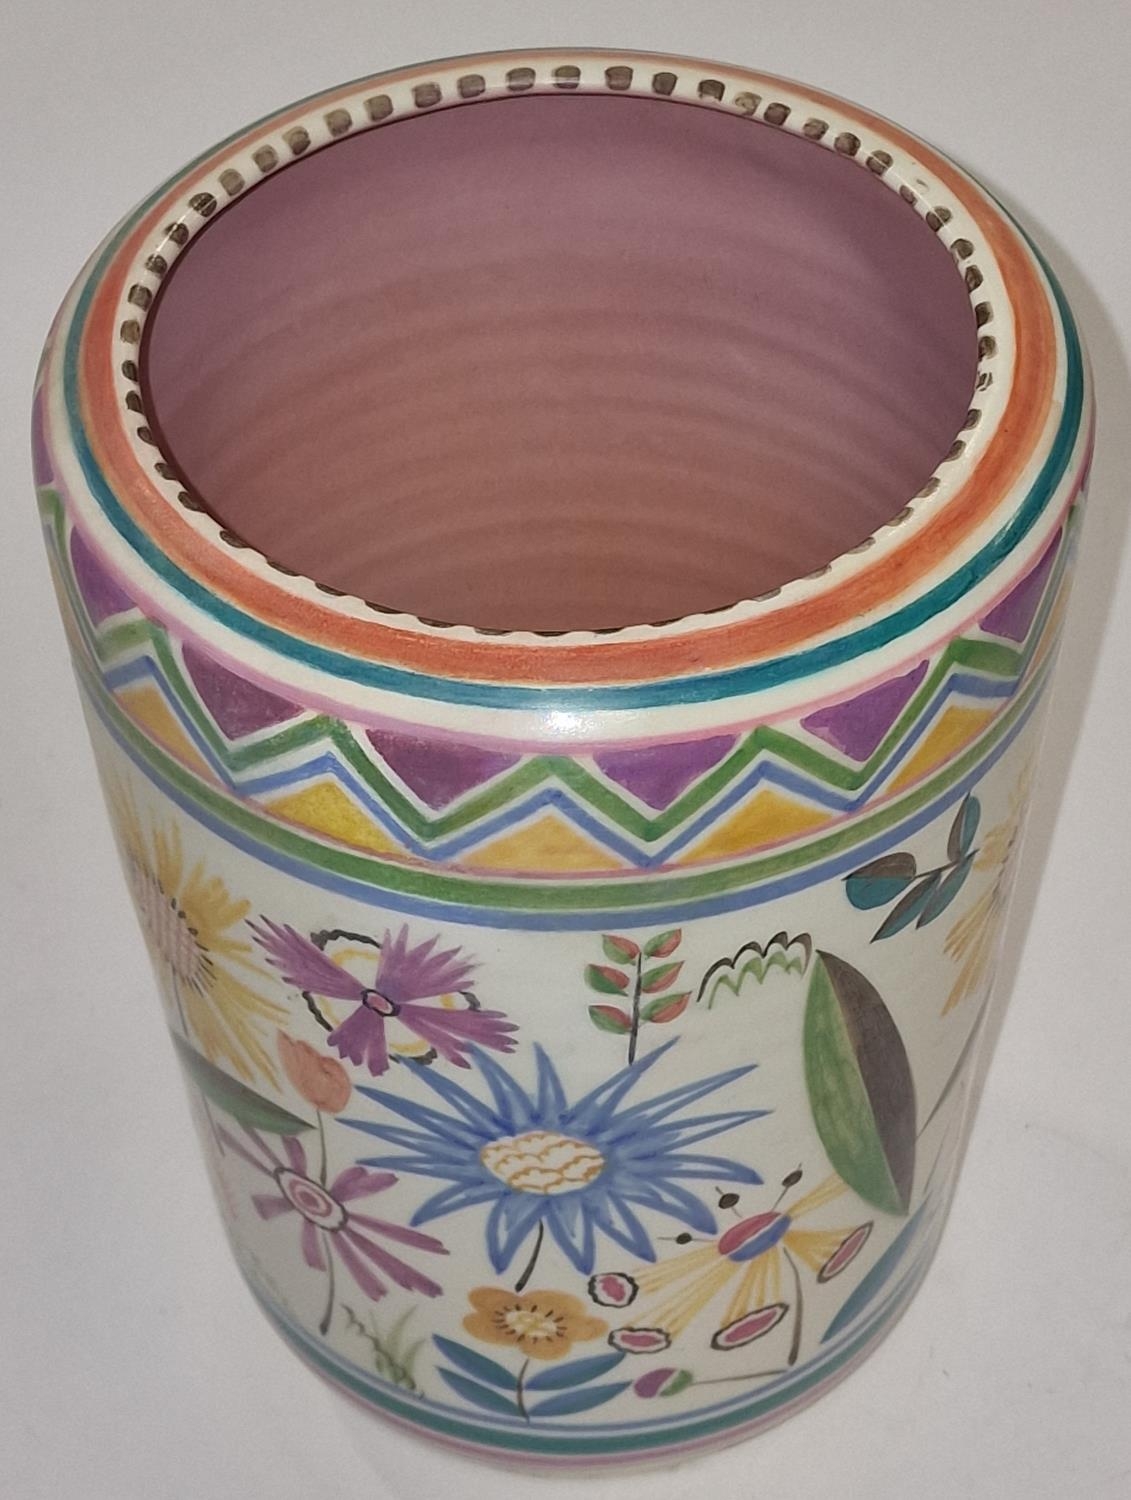 Poole Pottery shape 858 VM pattern vase decorated by Ruth Pavely, rare & hard to find pattern 9" - Image 2 of 3